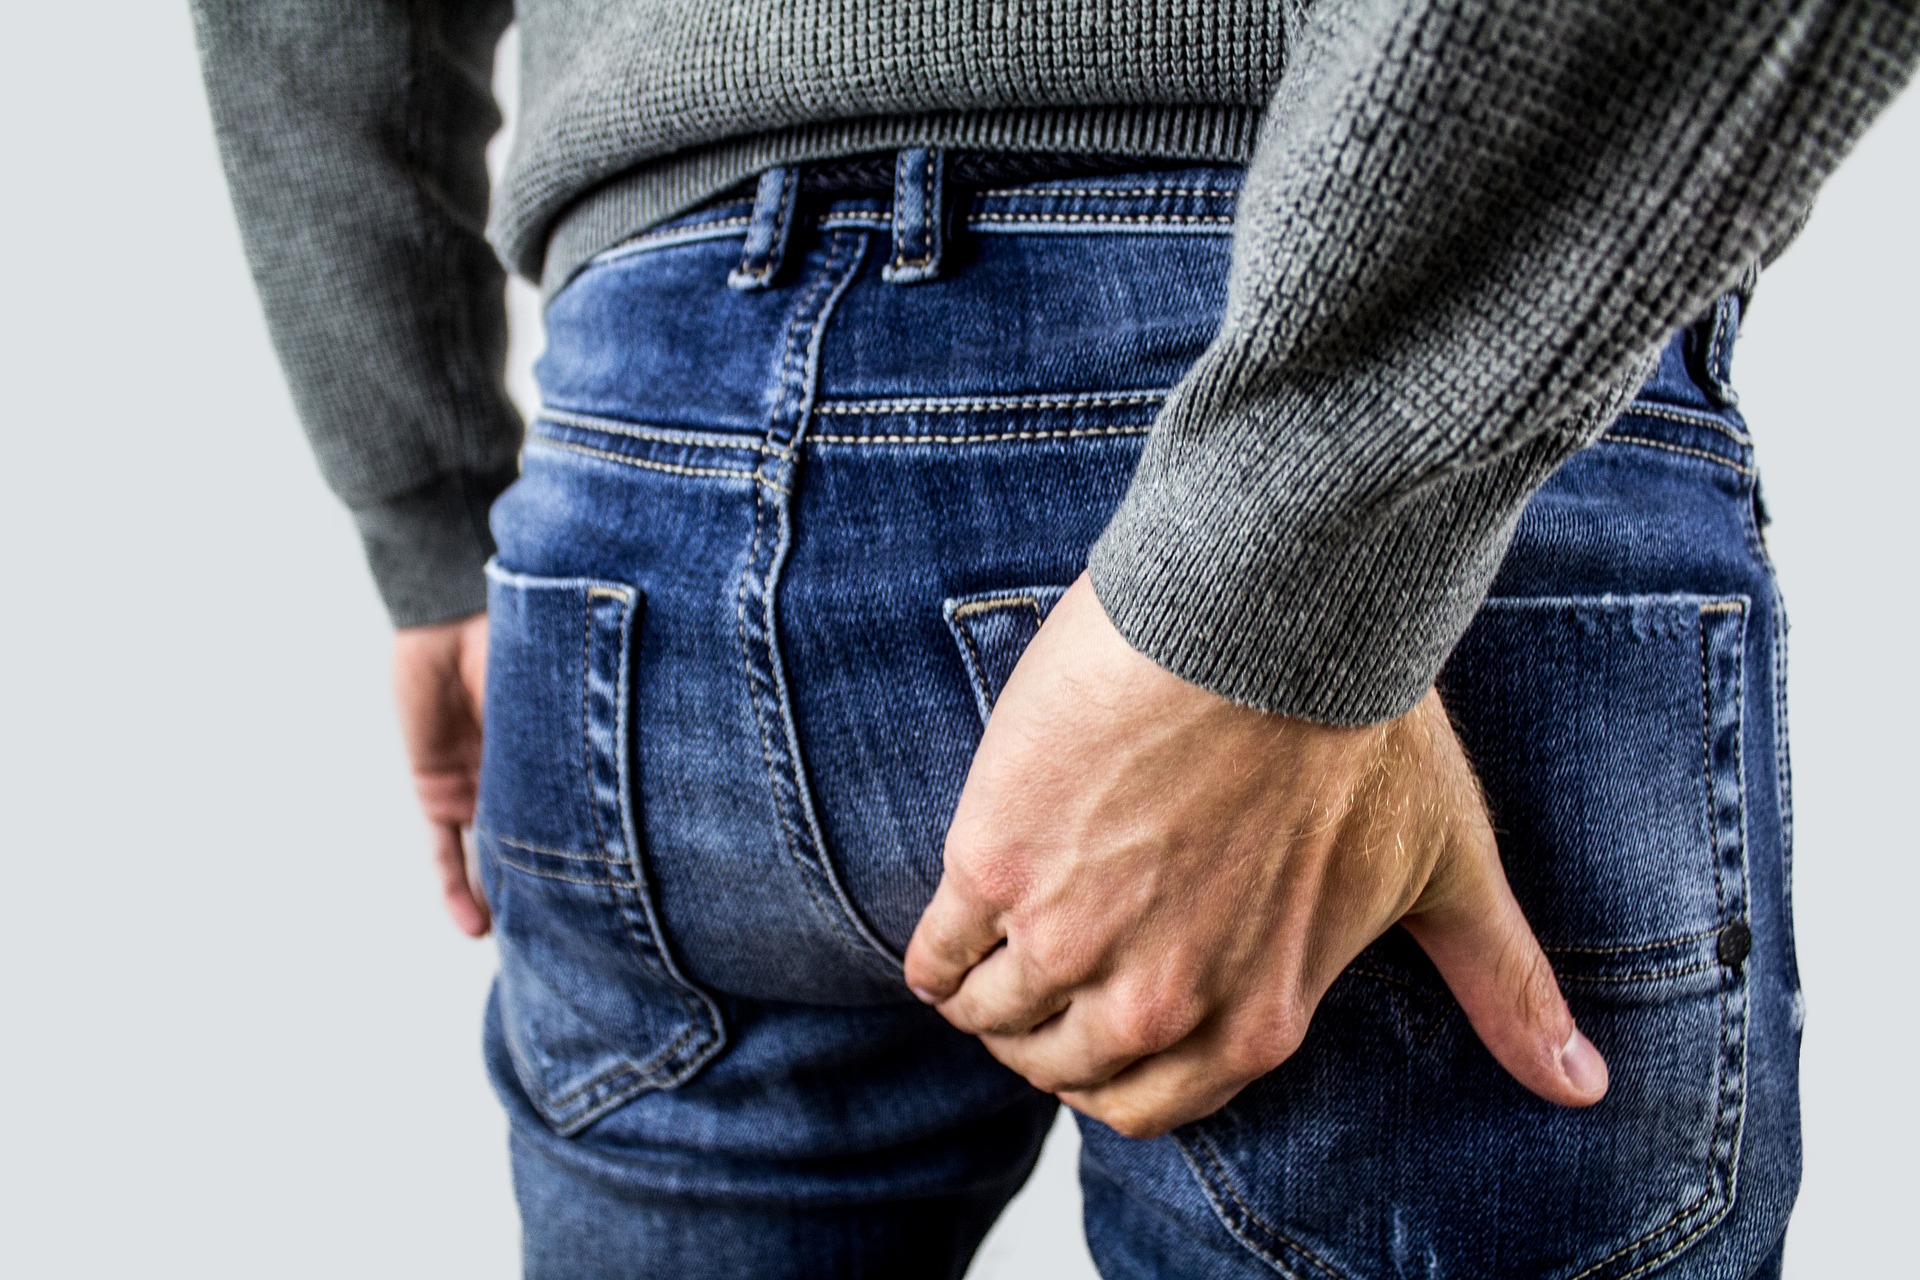 10 Science-backed Natural Remedies to Cure Hemorrhoids